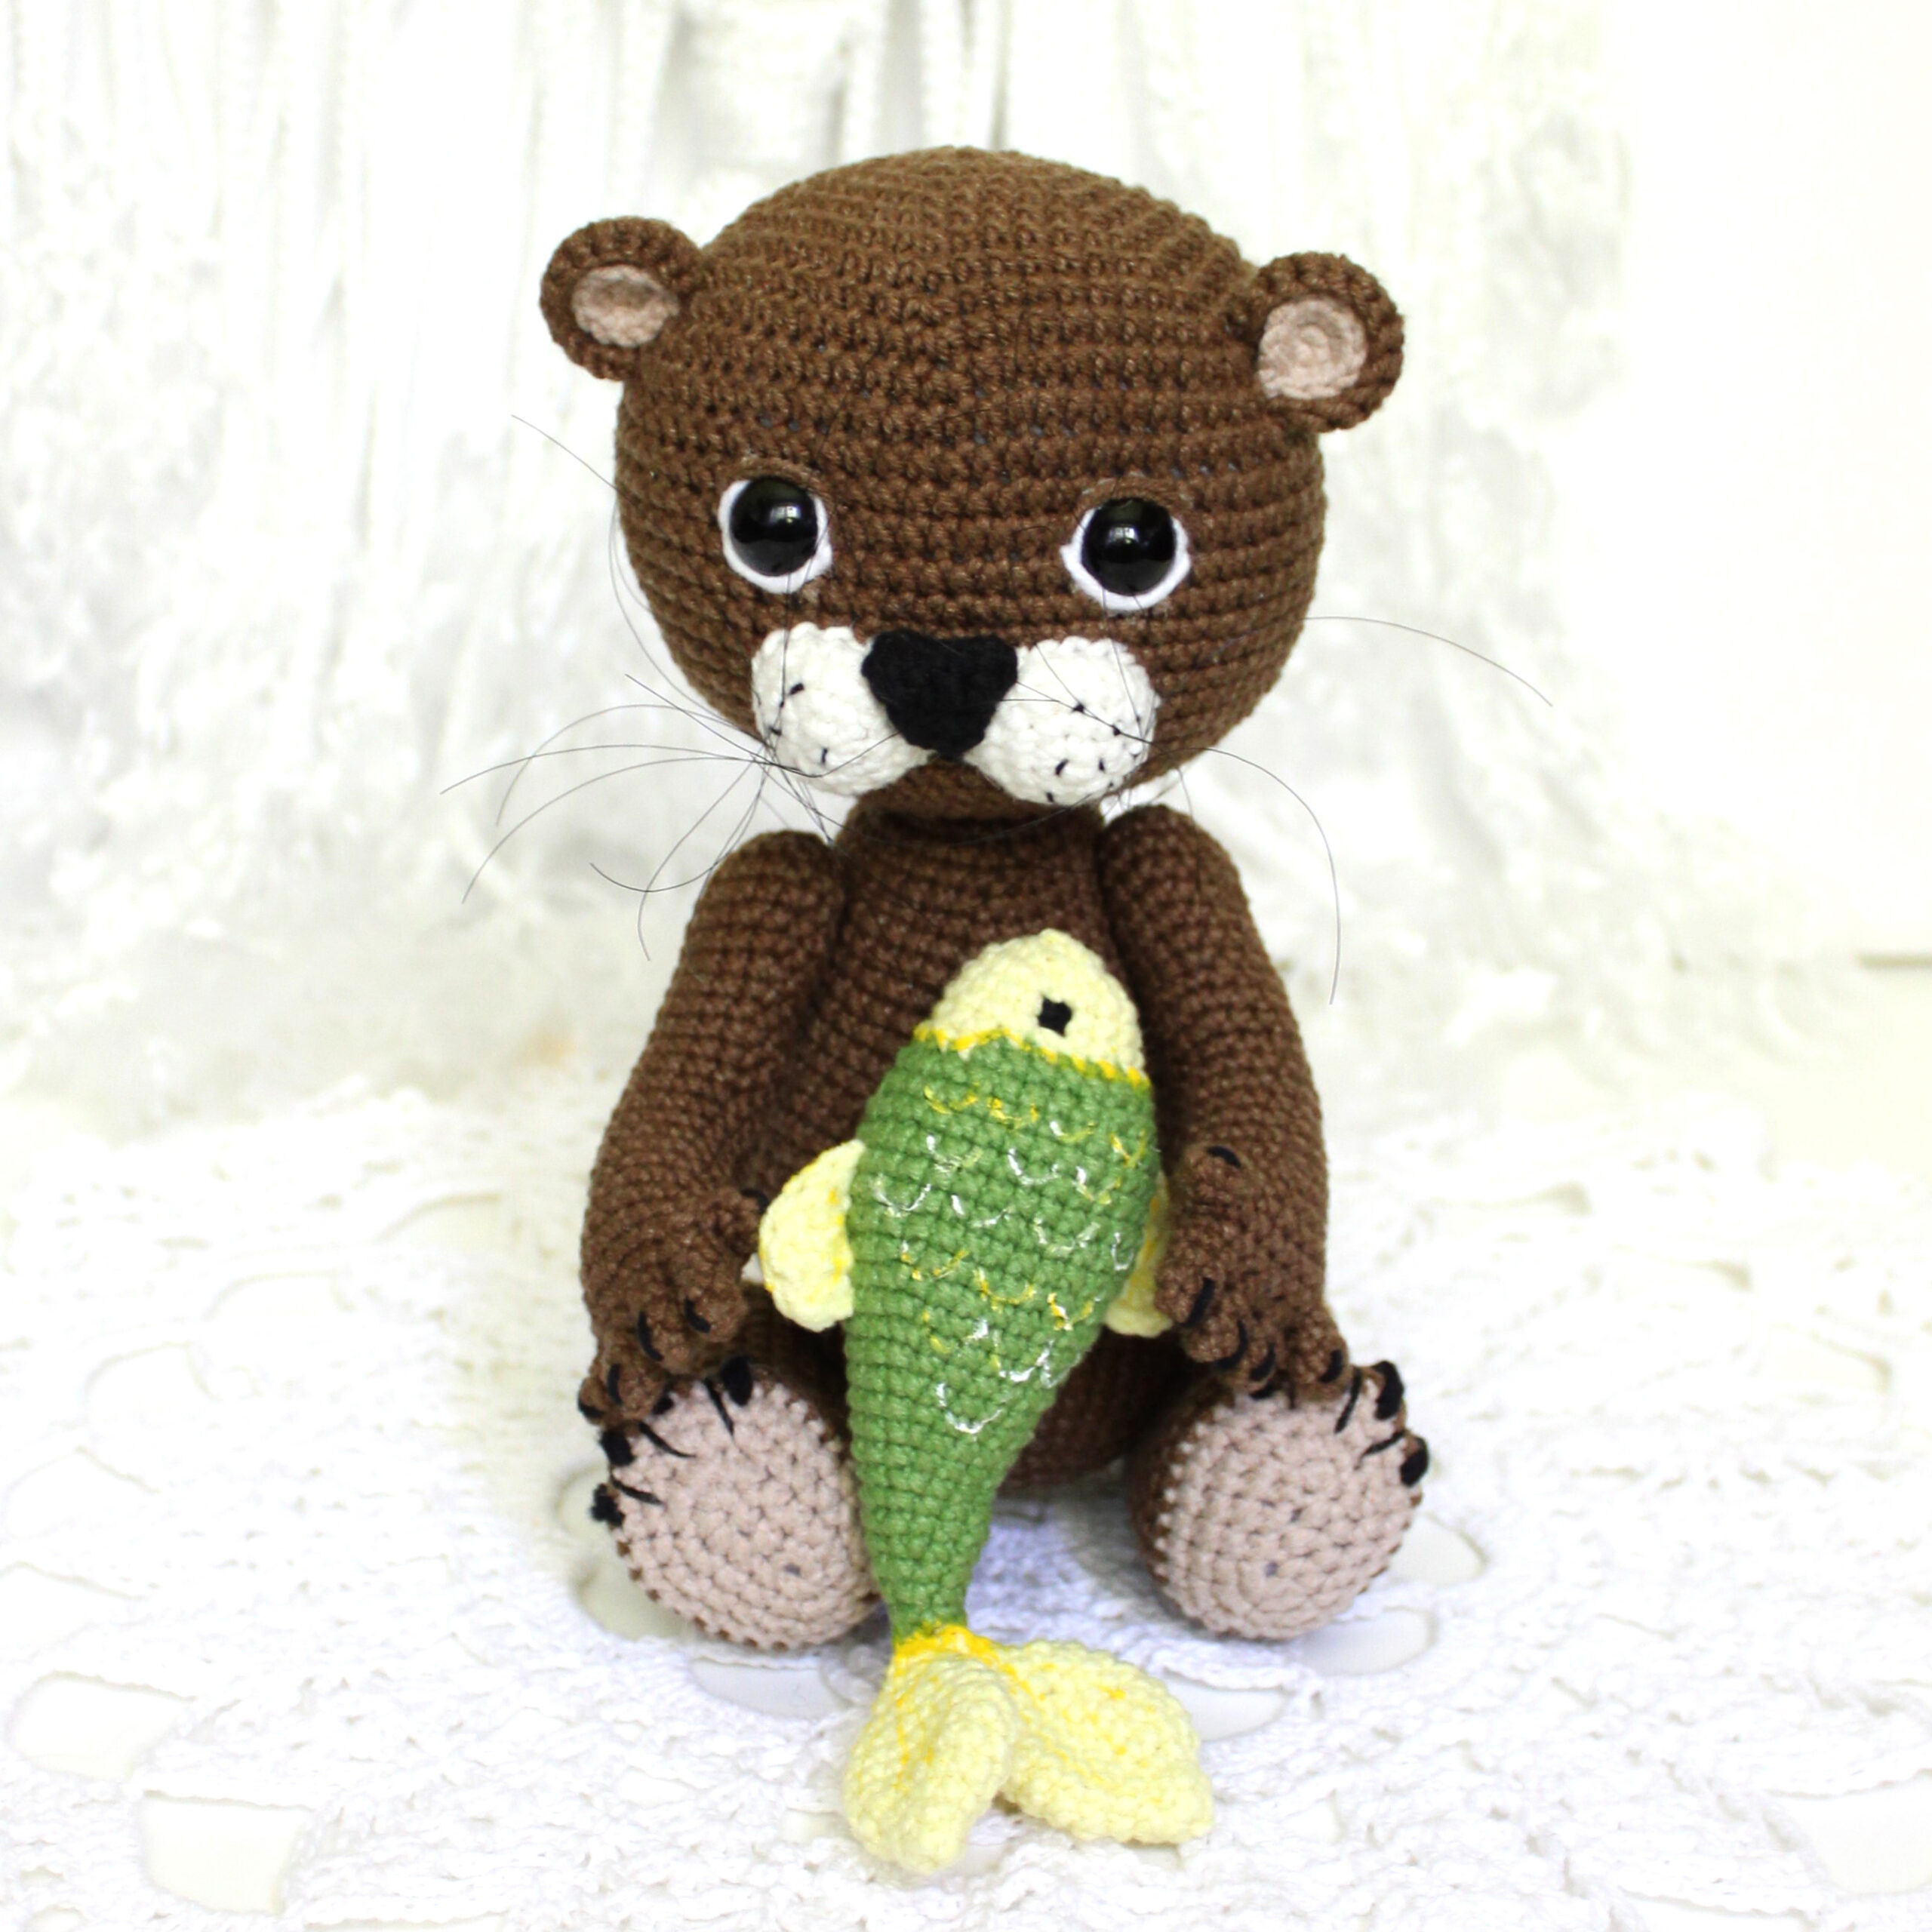 Crafts Corner on Instagram: CROCHET AMIGURUMI KIT  LULU OTTER😍🧶 Kit  contains: - 100% cotton yarn - Crochet hook - Toy stuffing - Pattern  booklet with step by step instructions - Embroidery